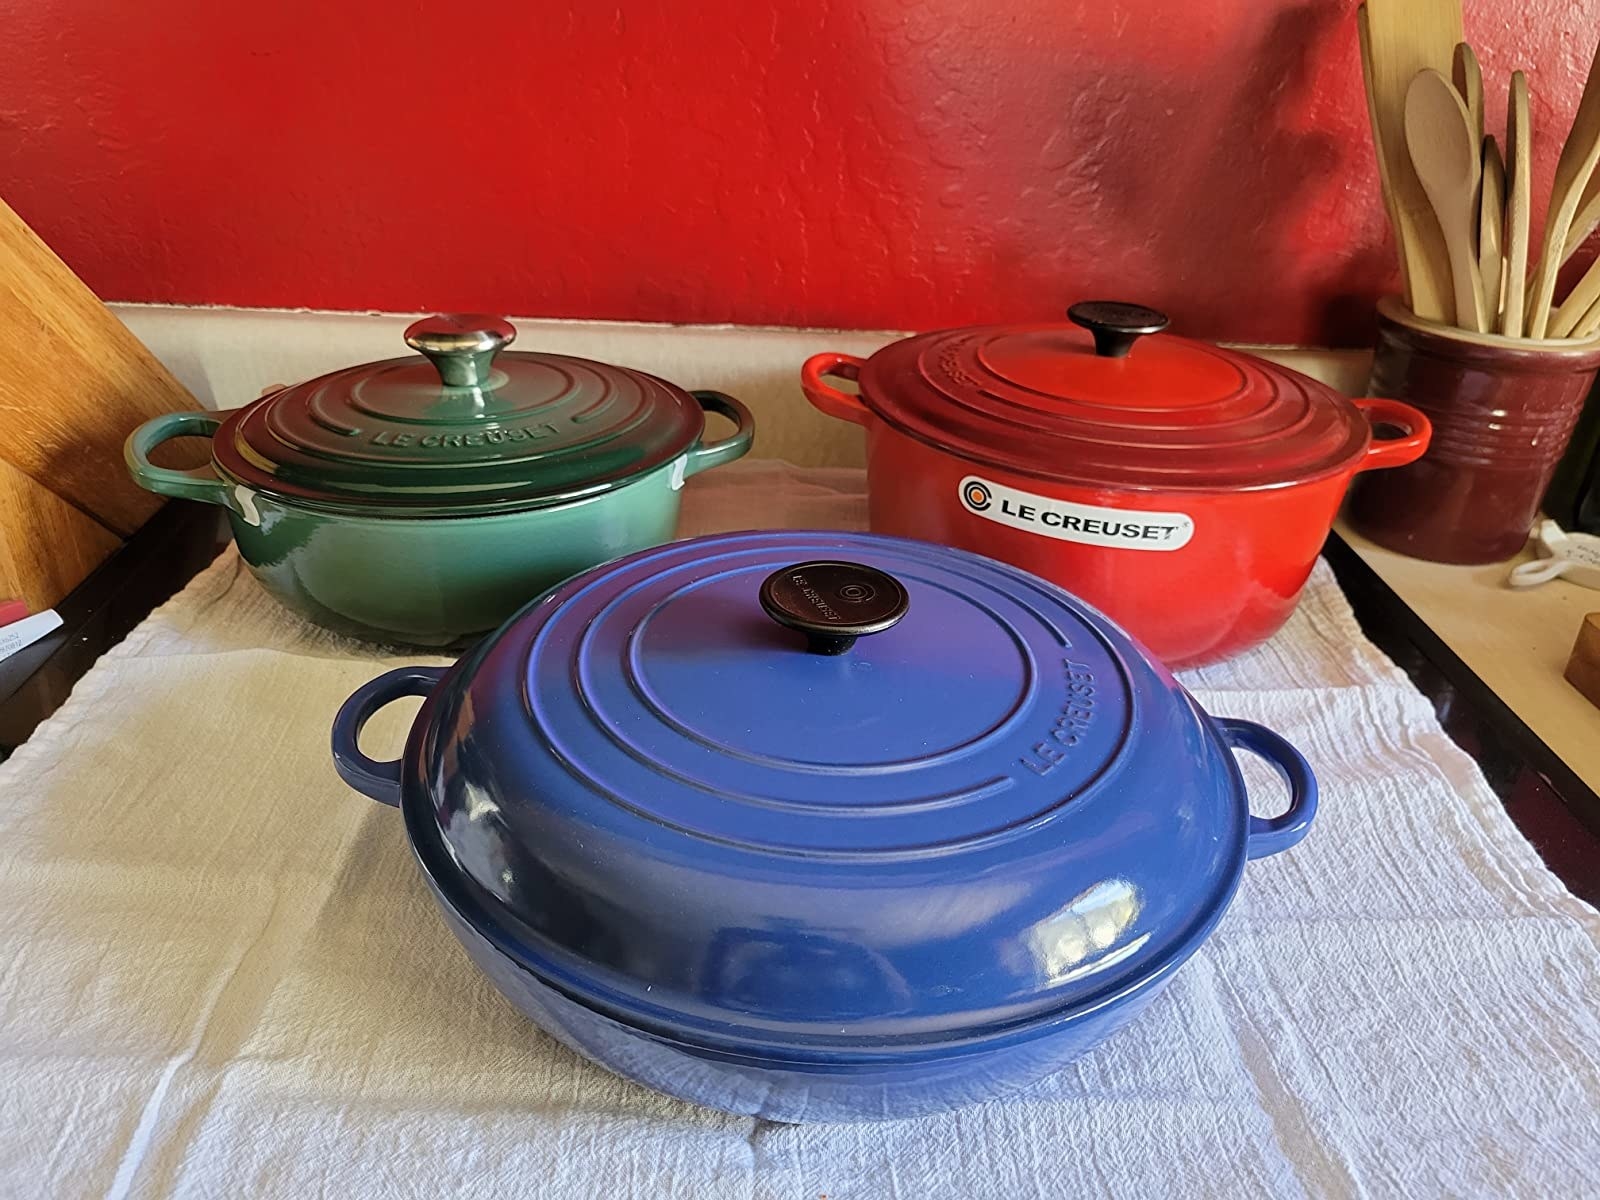 green, red, and blue Le Creuset pans on table